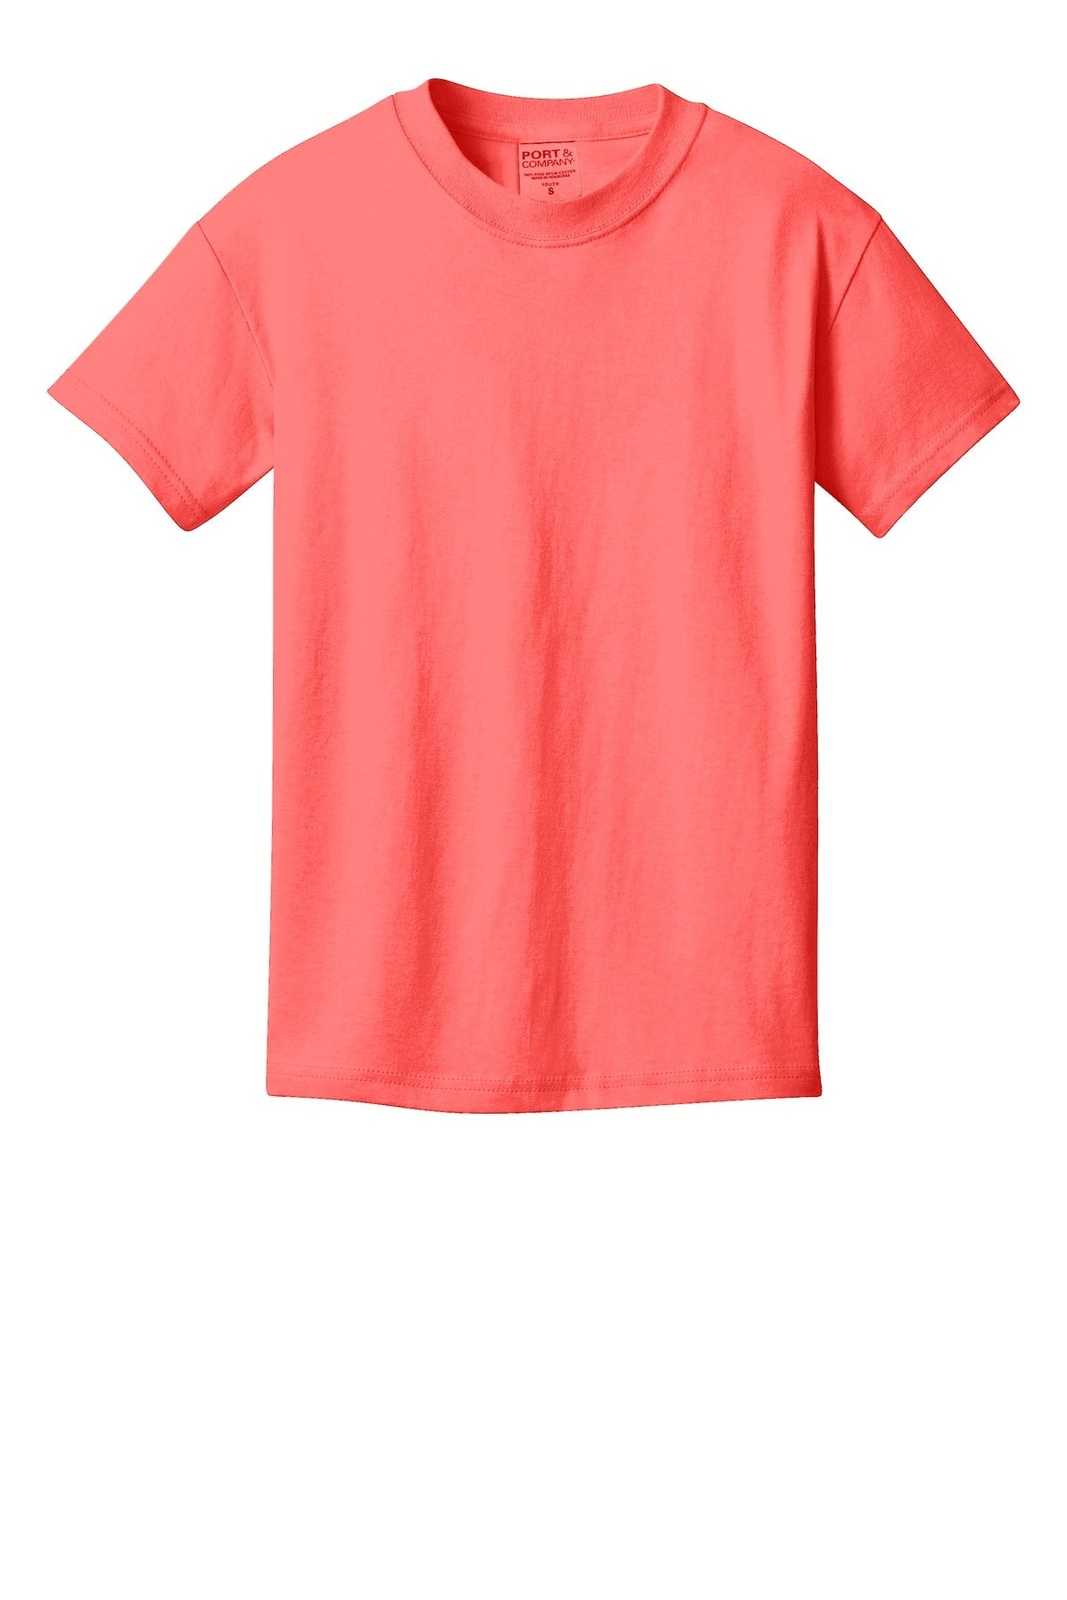 Port & Company PC099Y Youth Beach Wash Garment-Dyed Tee - Neon Coral - HIT a Double - 1